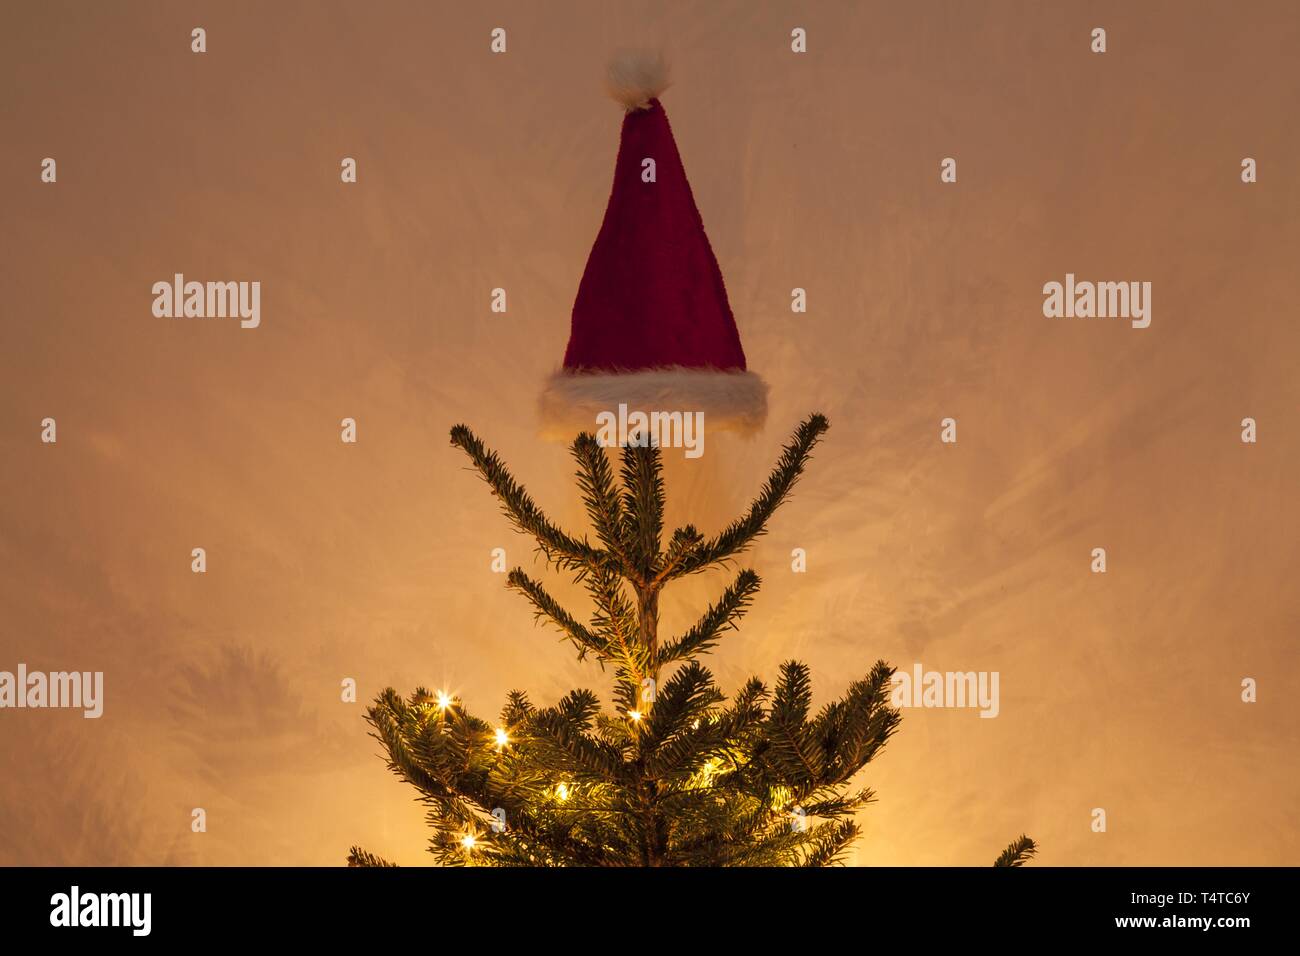 Top of a Christmas tree with a Christmas hat Stock Photo